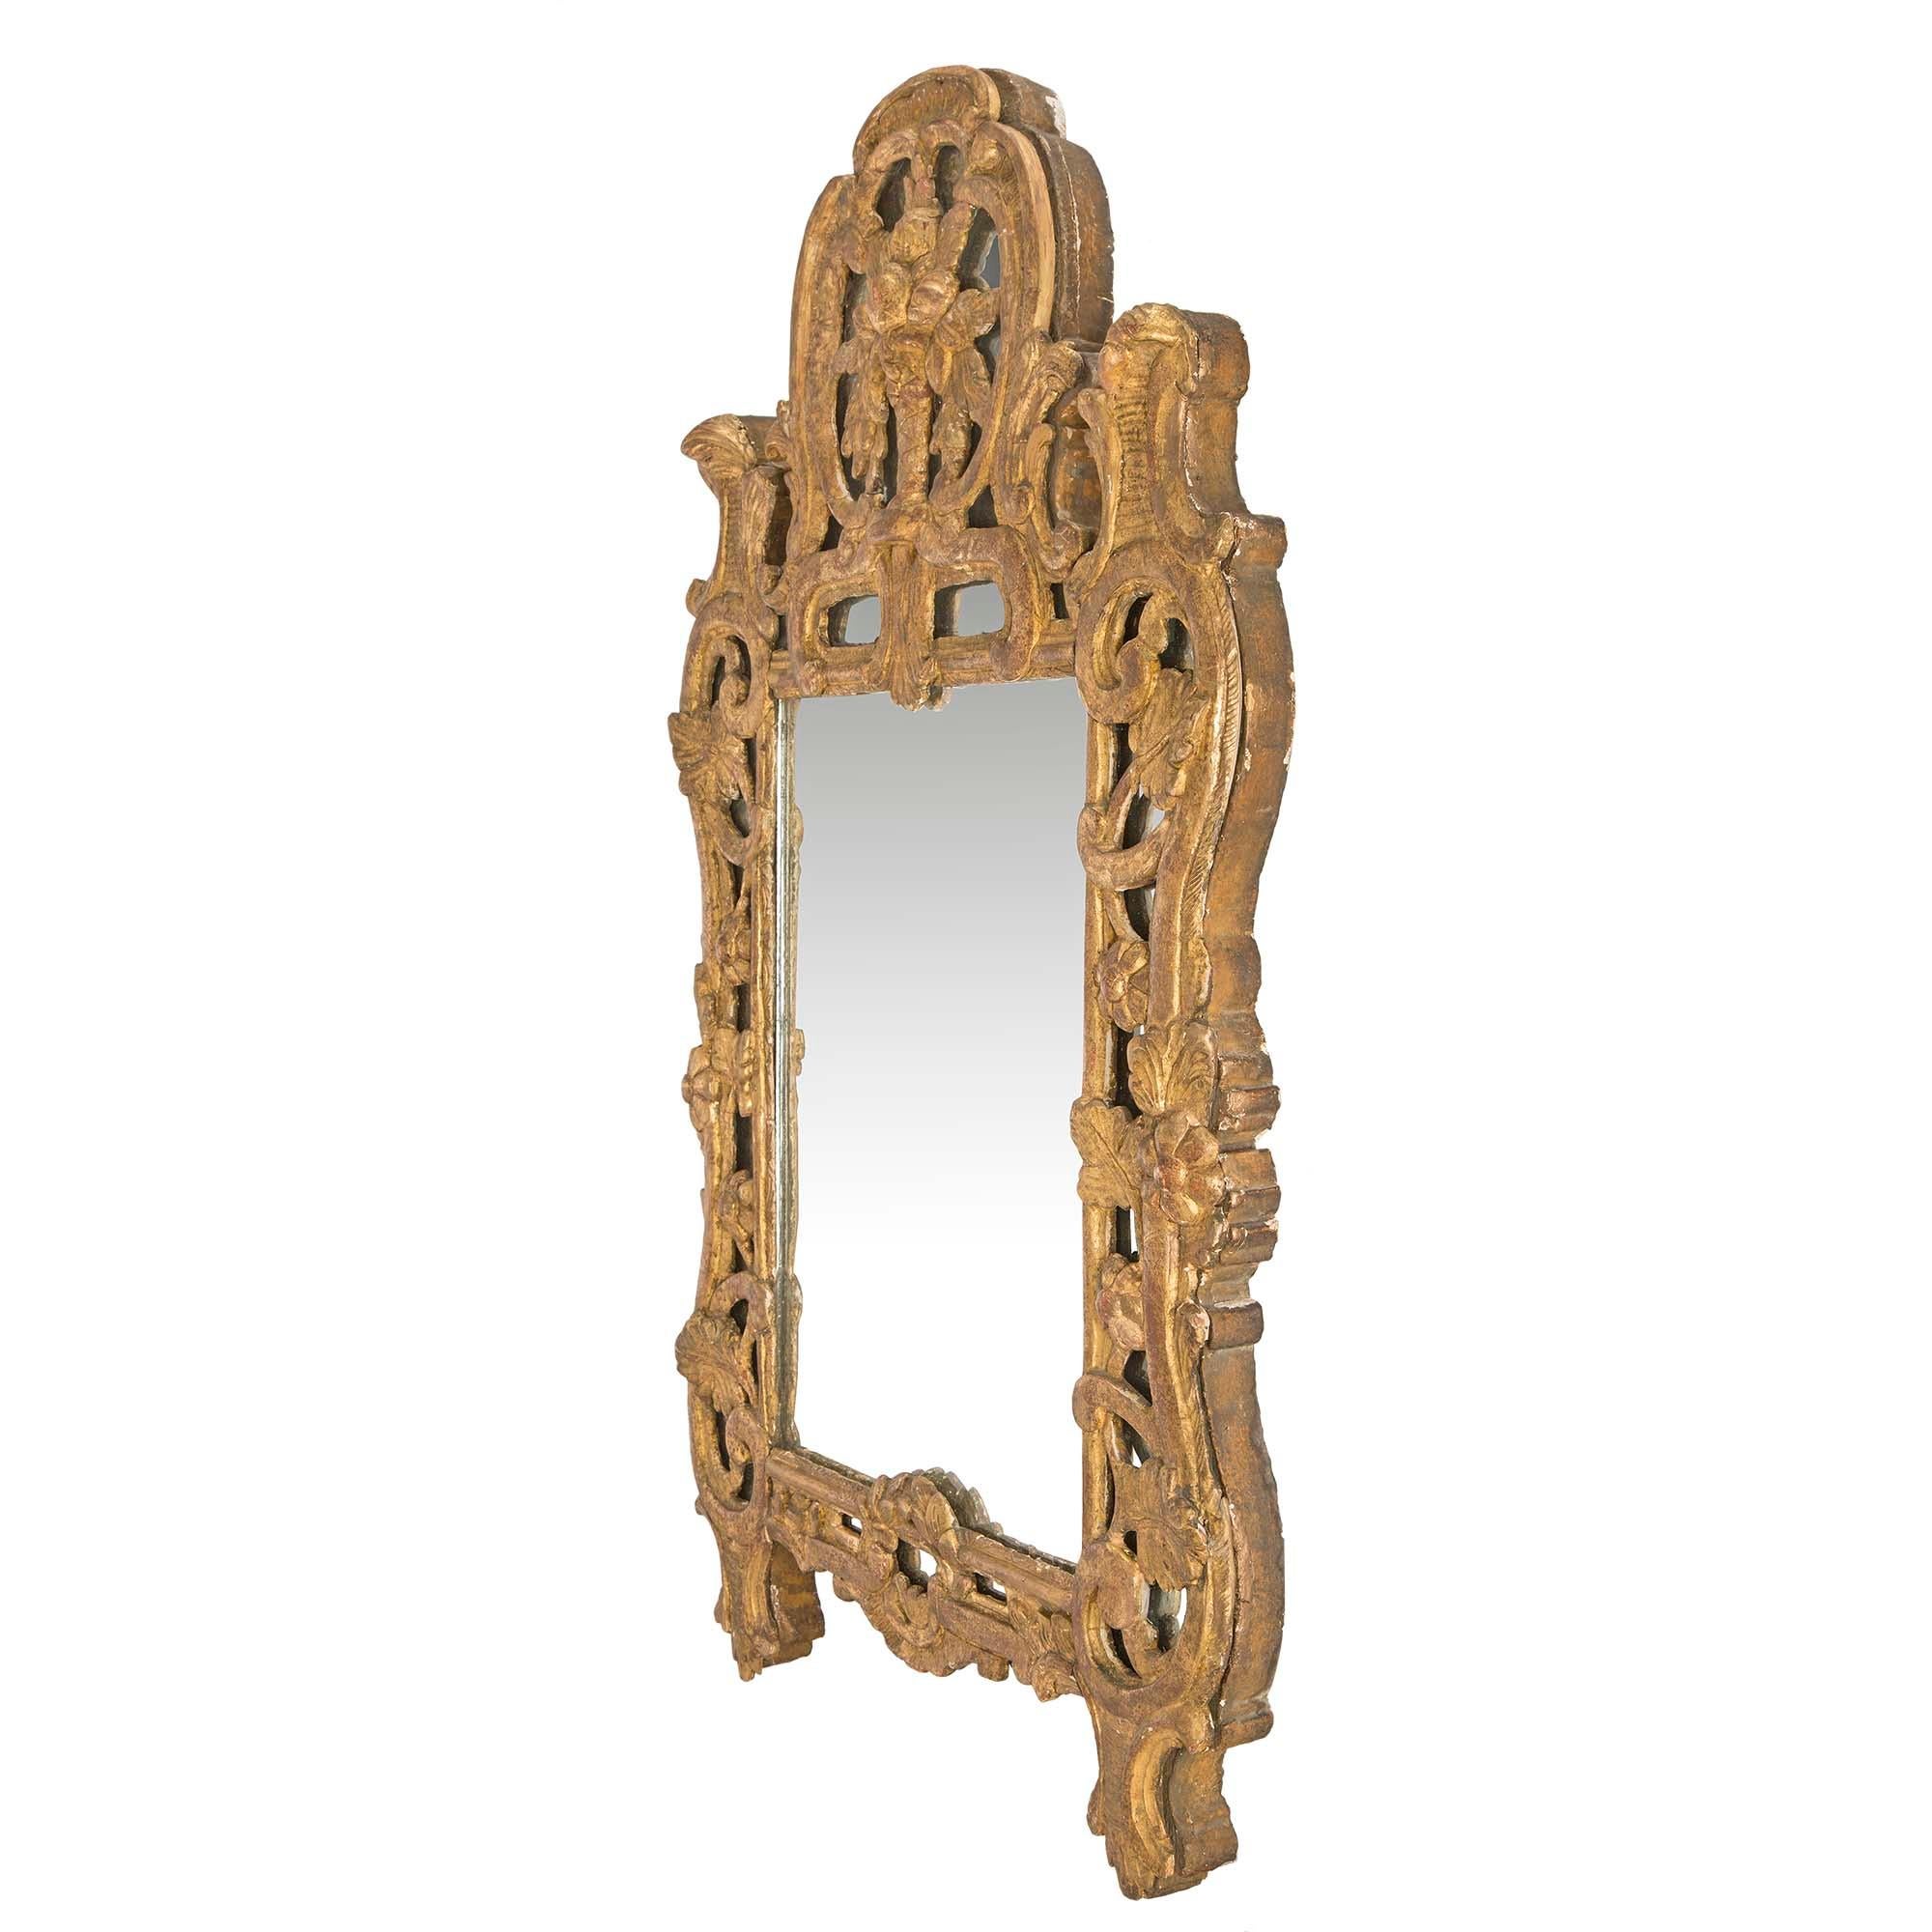 A smaller scale striking French 18th century Régence period giltwood mirror. This handsome mirror has a pierced scrolled giltwood frame adorned with all original mirror plates. Centered at the bottom is a laurel wreath and scrolls continue up each